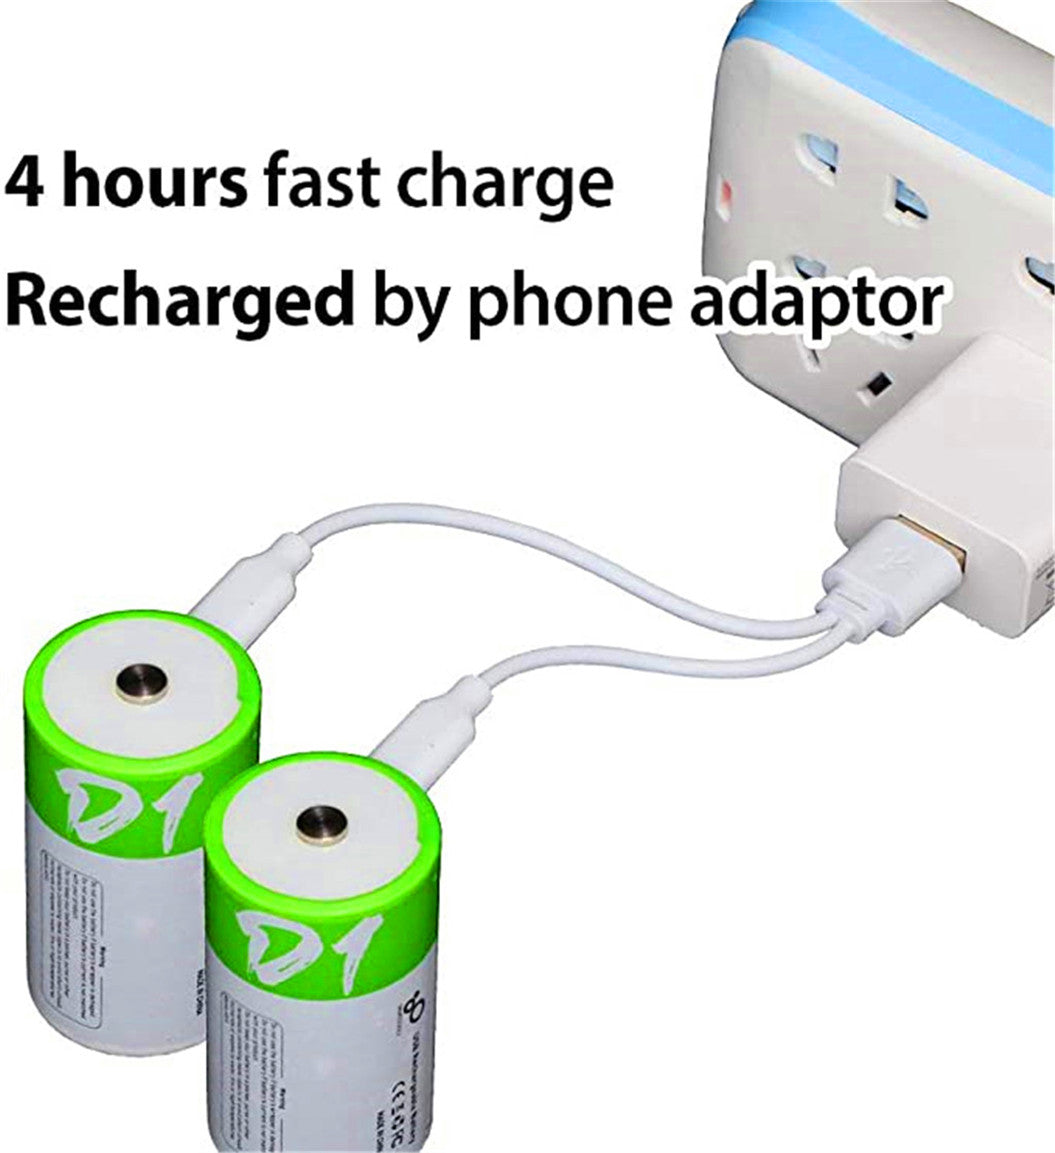 2 pieces of rechargeable USB-D lithium-ion battery, 1.5 V, 12000 mWh, rechargeable D-battery, 4 hours quick charge, more constant